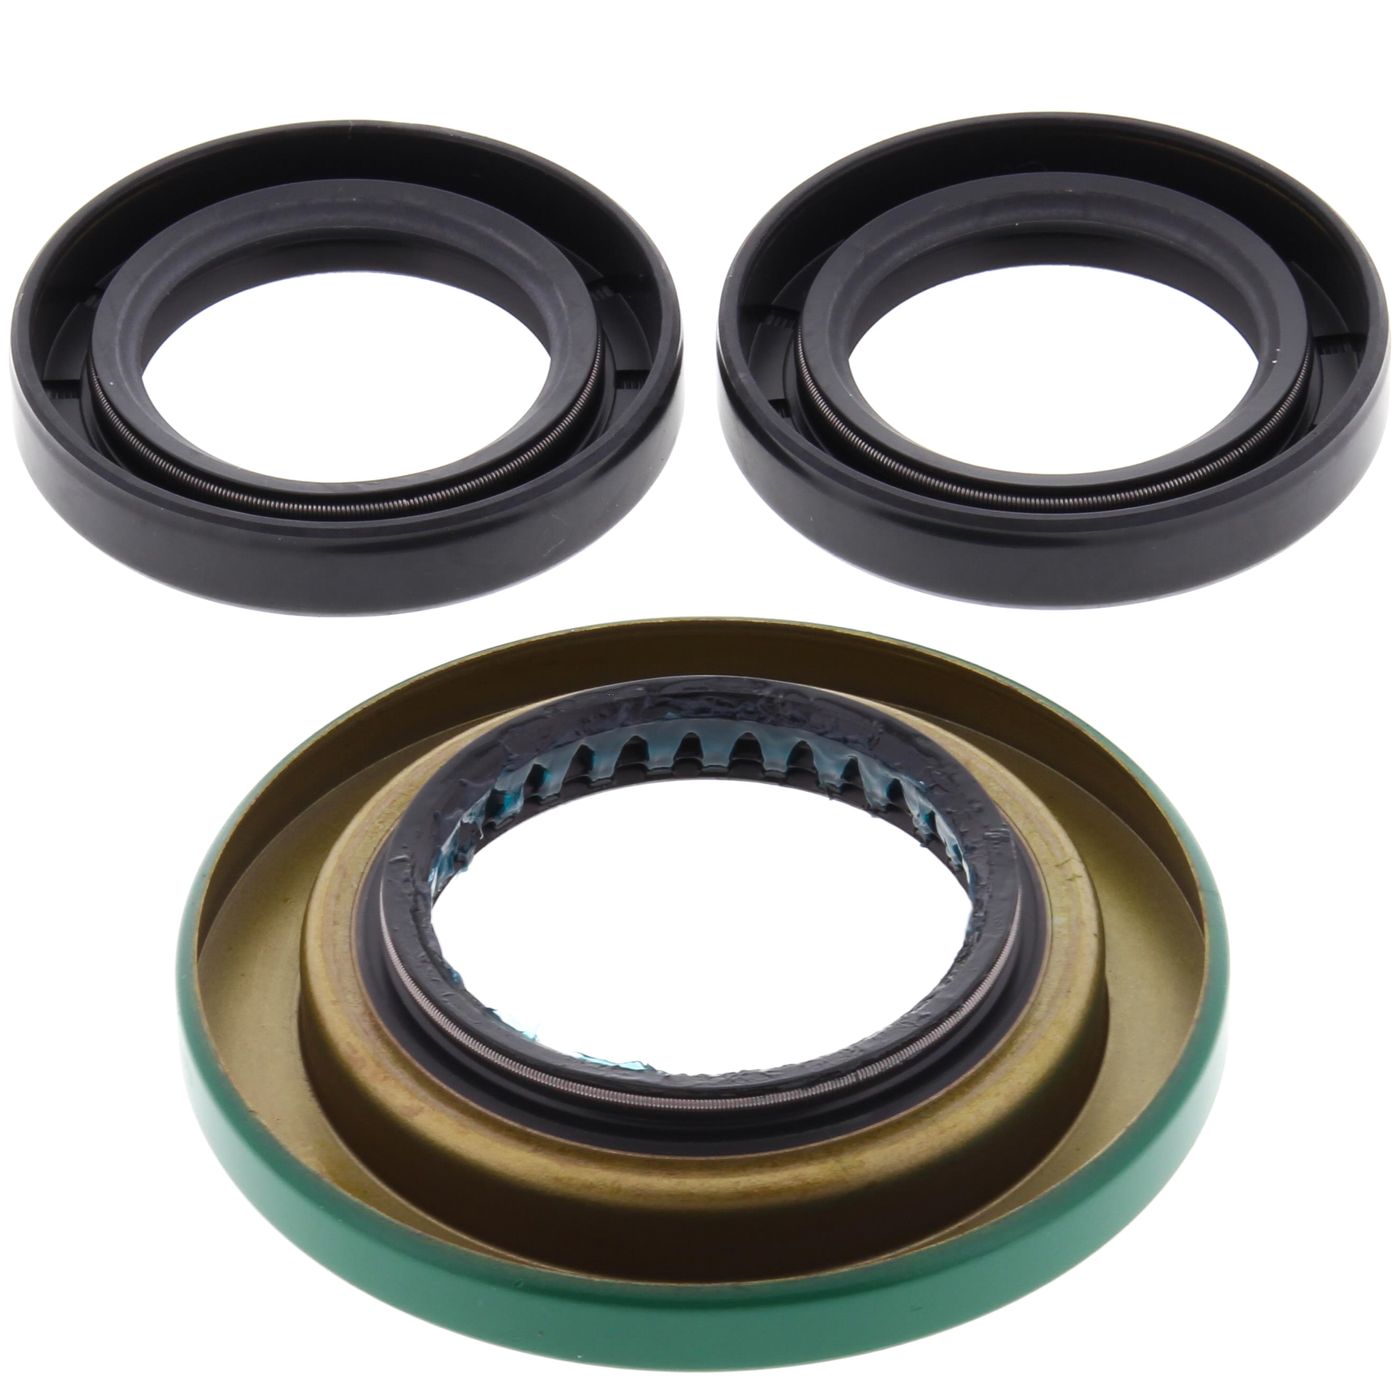 Wrp Diff Seal Kits - WRP252068-5 image